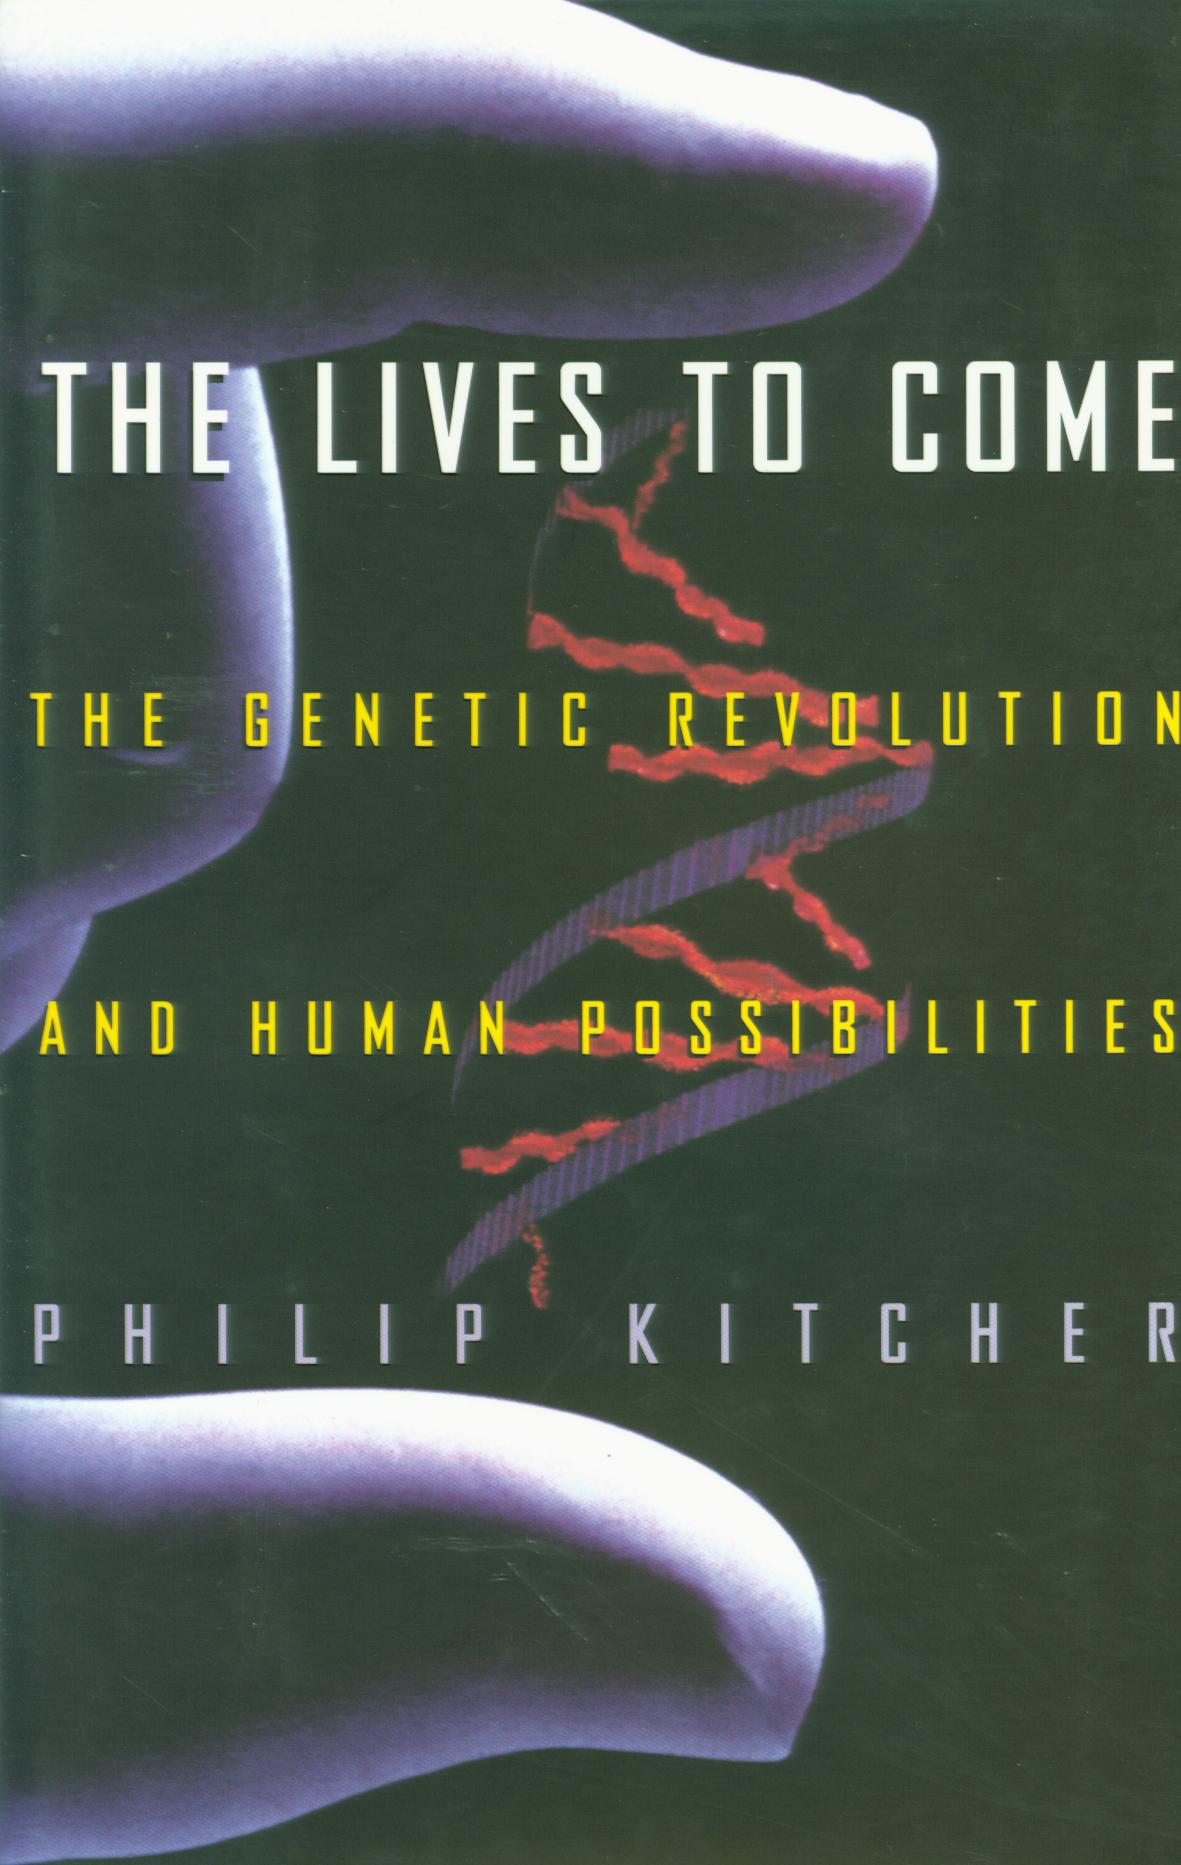 THE LIVES TO COME: the genetic revolution and human possibilities.